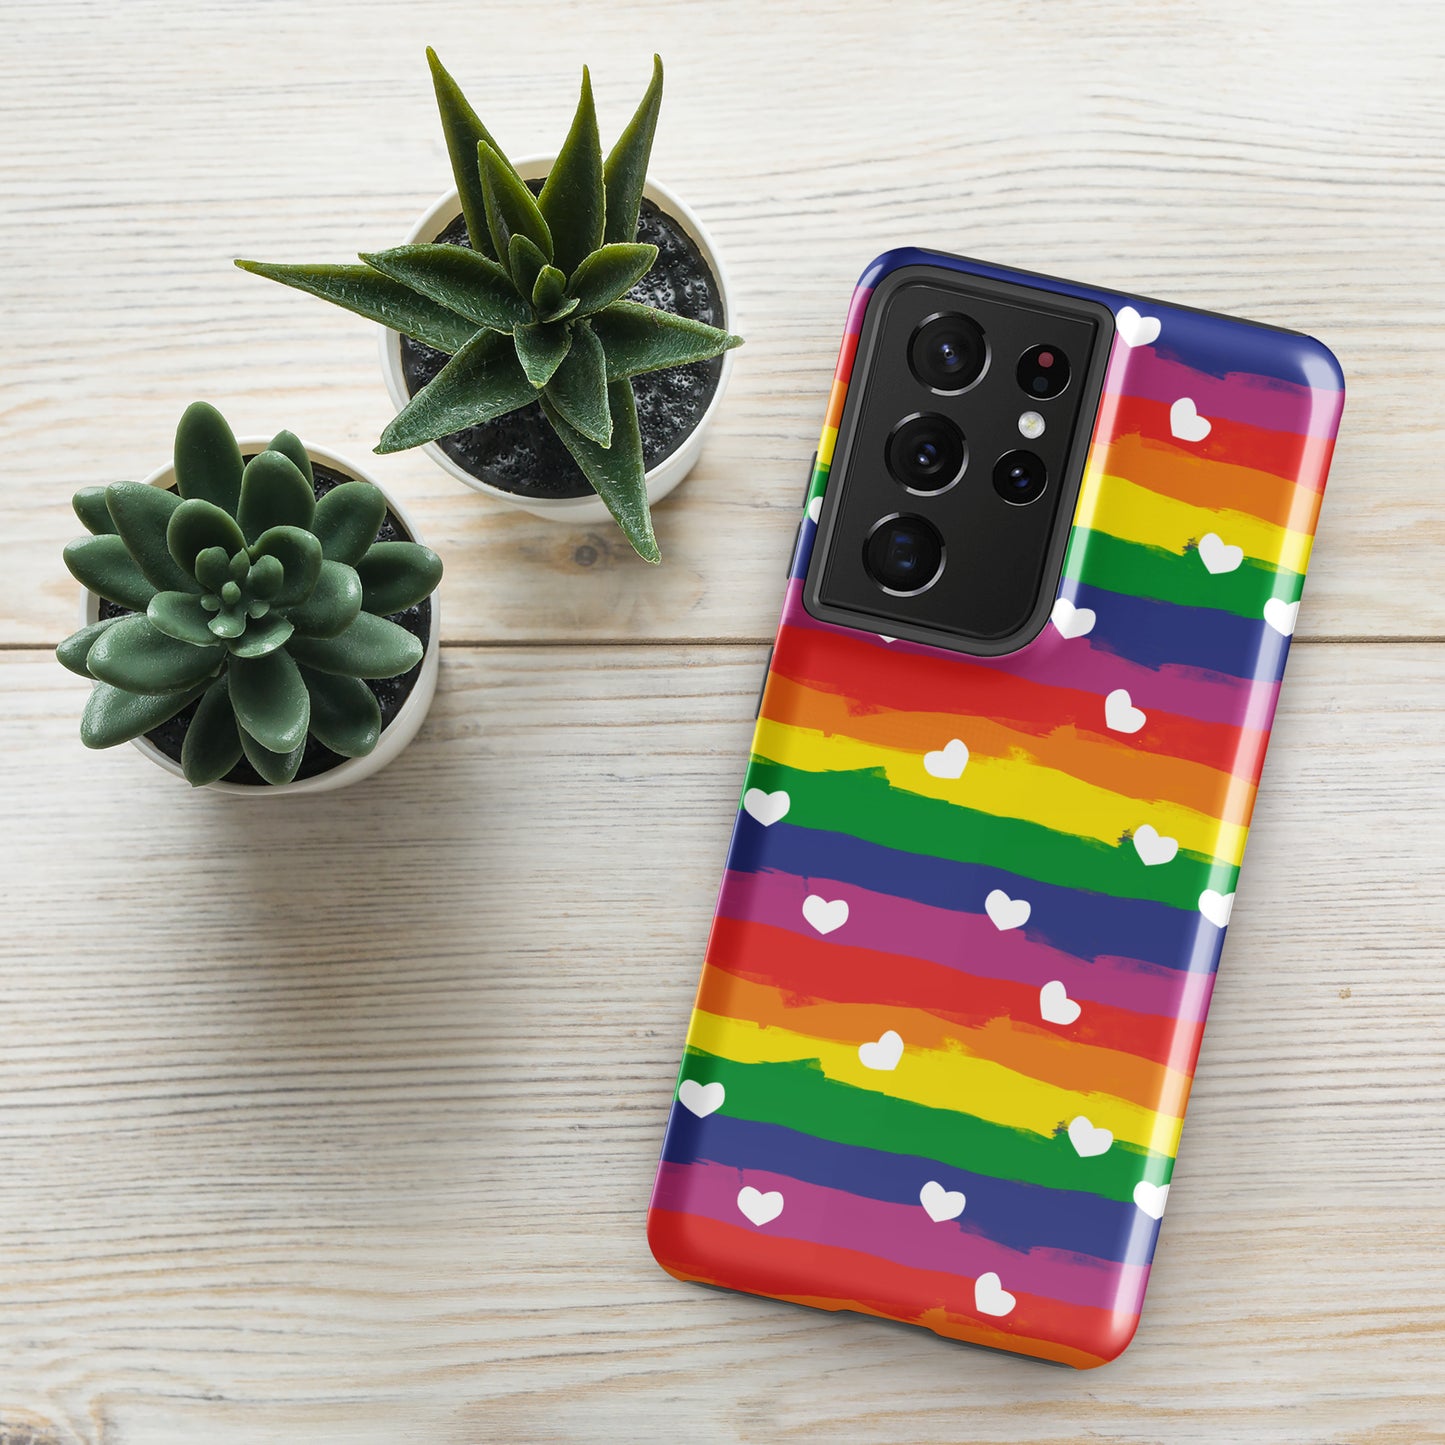 Rainbow Hearts Tough case for Andriod